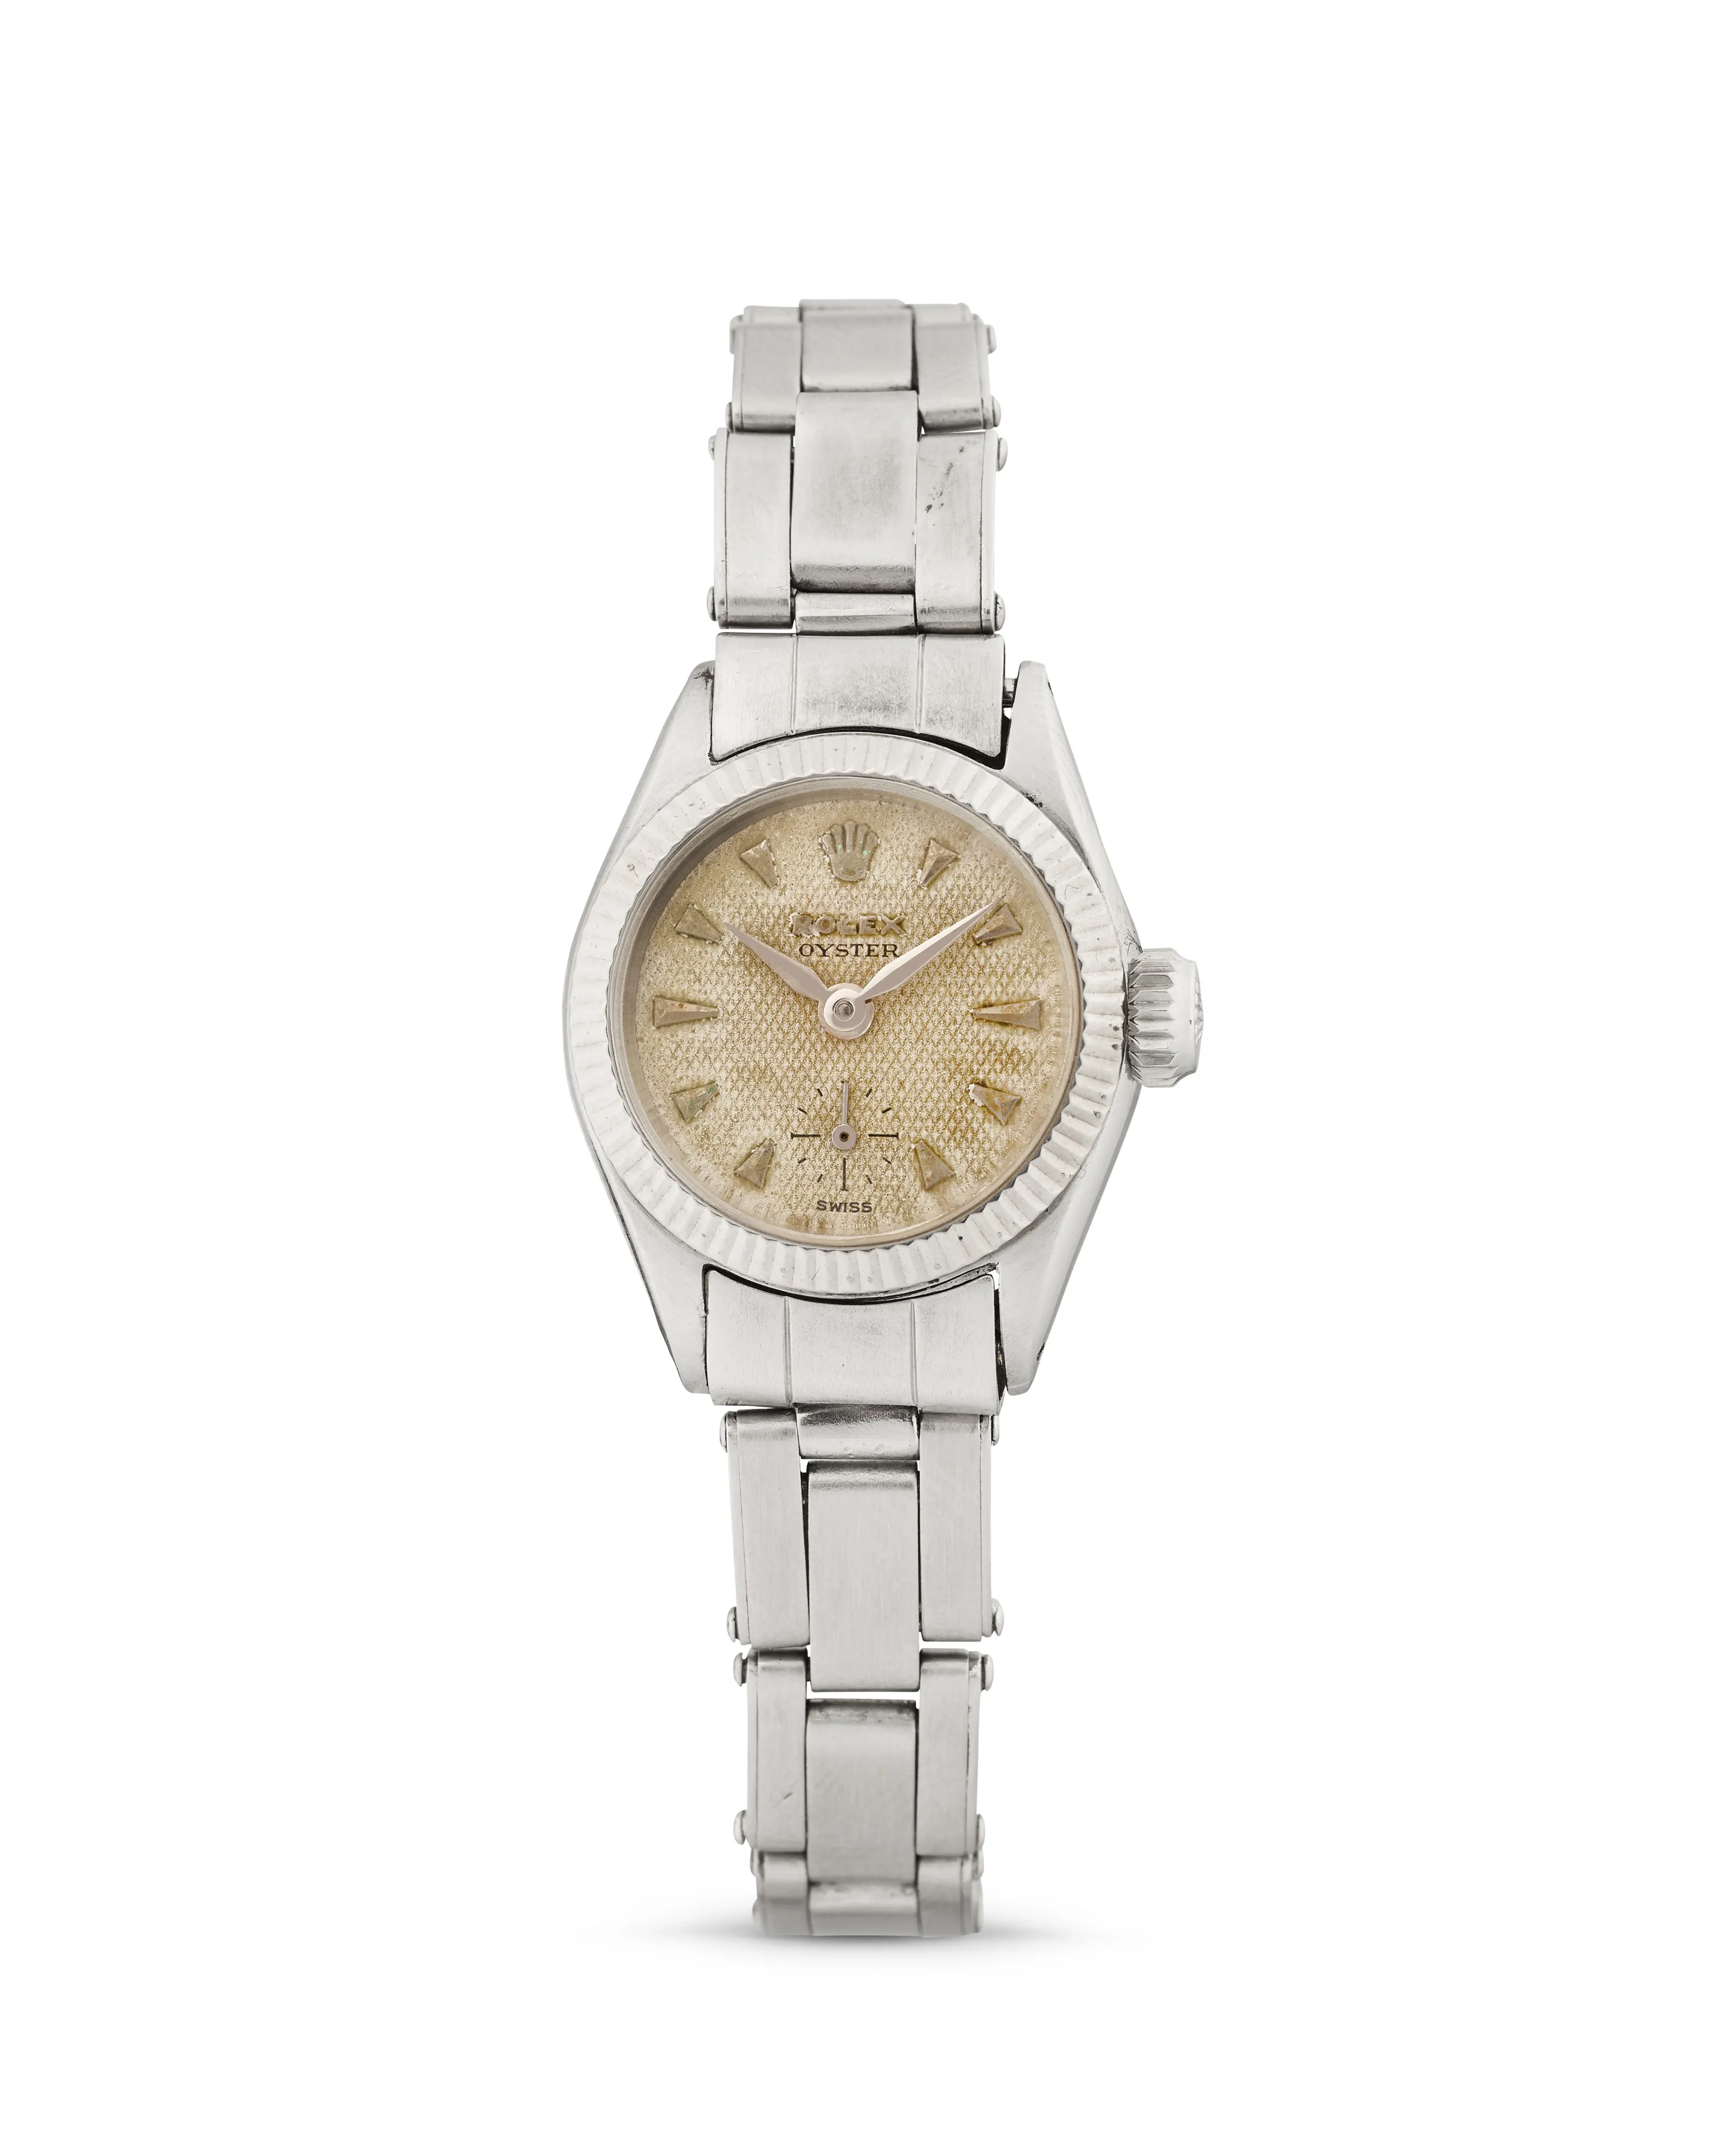 Rolex Precision 6525 21mm White gold and stainless steel Cream